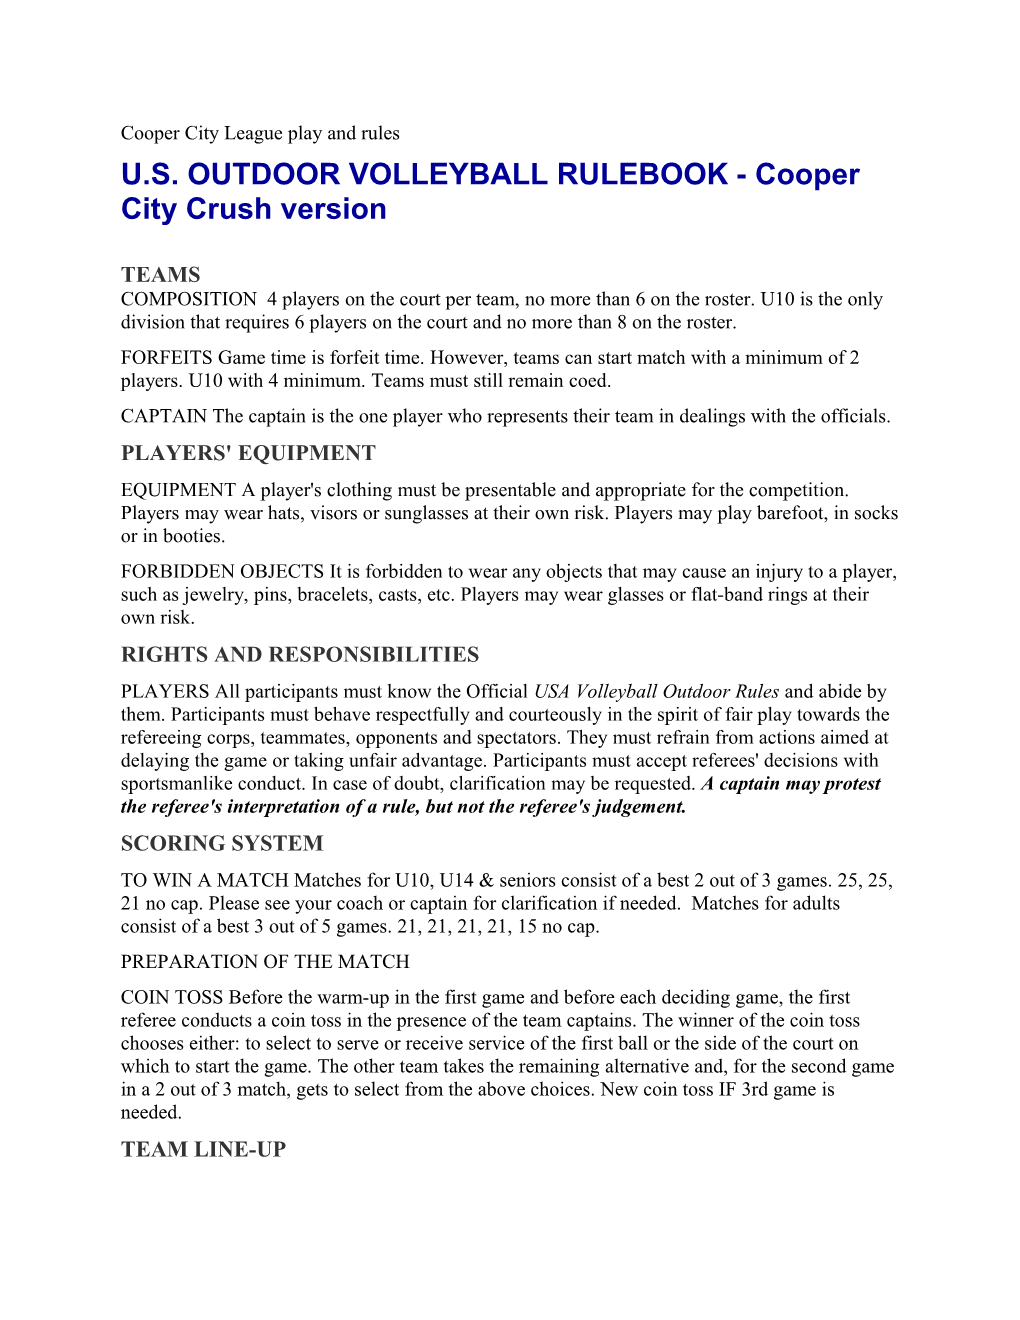 U.S. OUTDOOR VOLLEYBALL RULEBOOK - Cooper City Crush Version